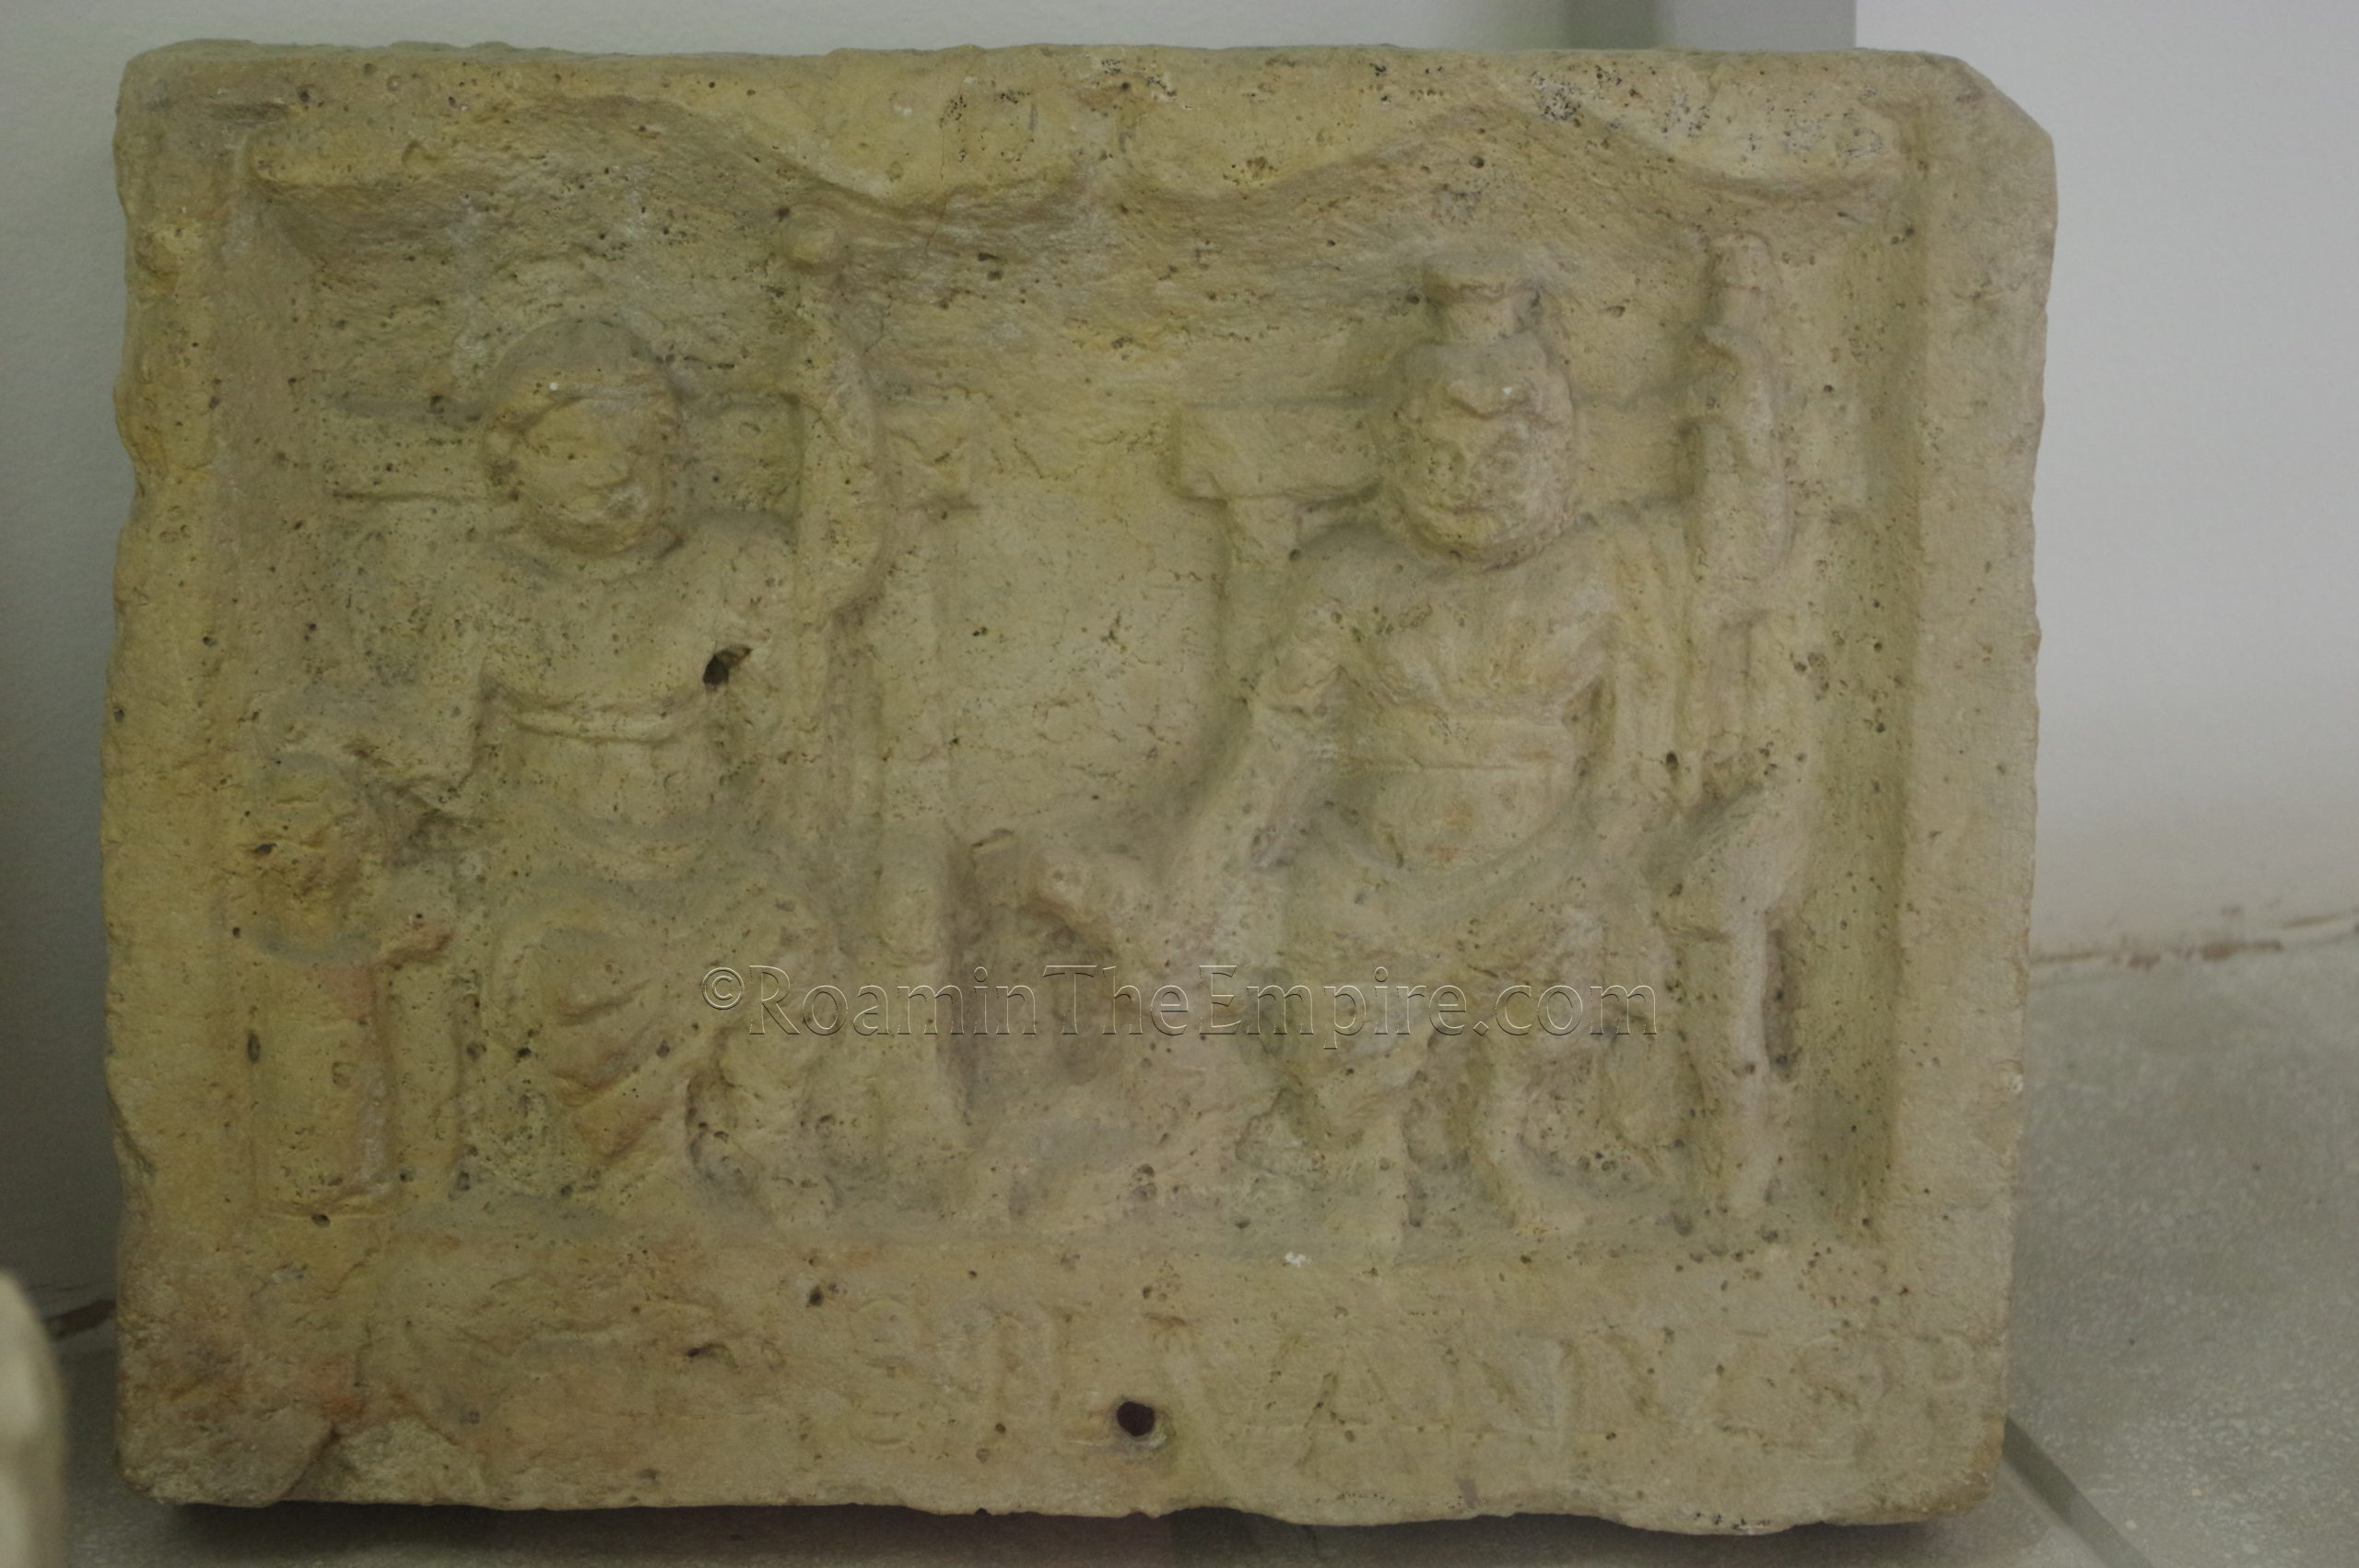 Votive relief dedicated to Pluto and Proserpina by Marcus Publius Silvanus. From Óbuda, dated to the 3rd century CE. Aquincum Archaeological Museum.